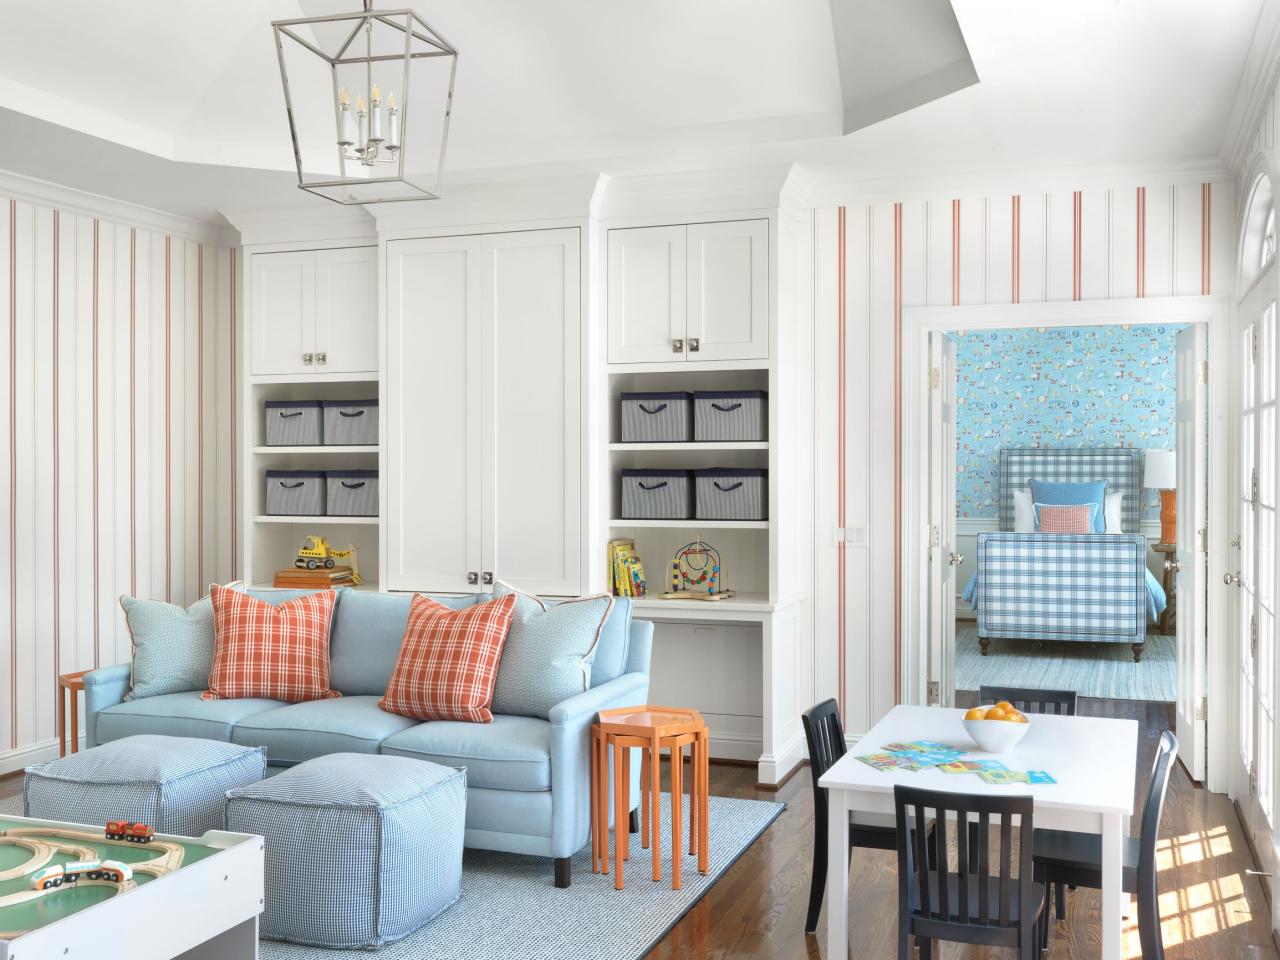 Sherwin Williams Announces Hgtv Home 2020 Color Of The Year And Color Collection Of The Year Hgtv